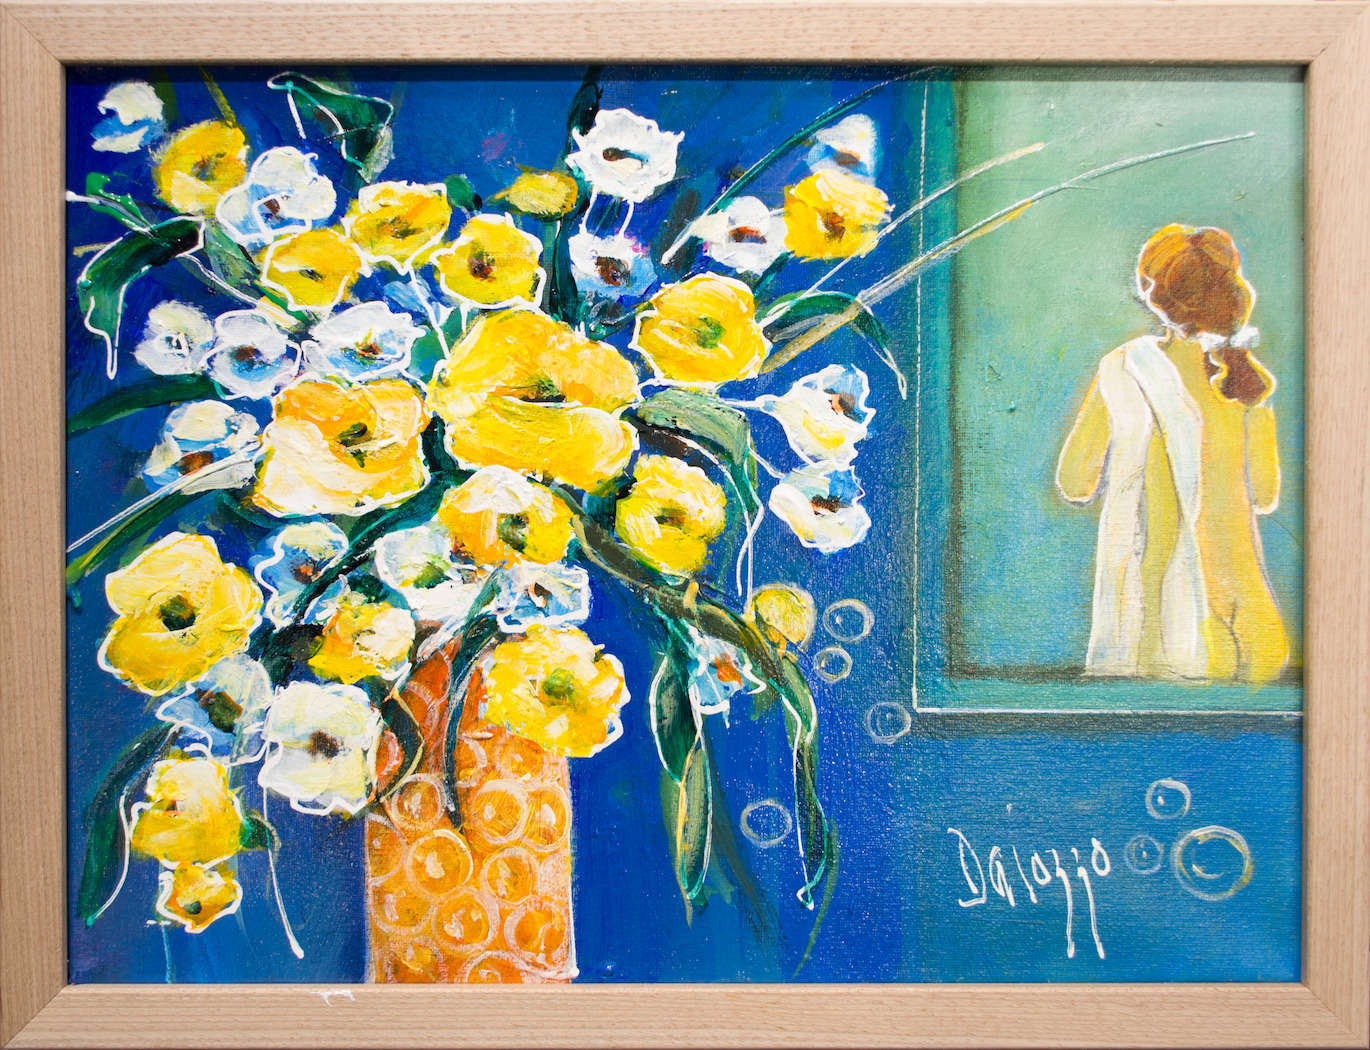 Framed Front View Of Still Life Painting "A Pop of Yellow" By Lucette Dalozzo